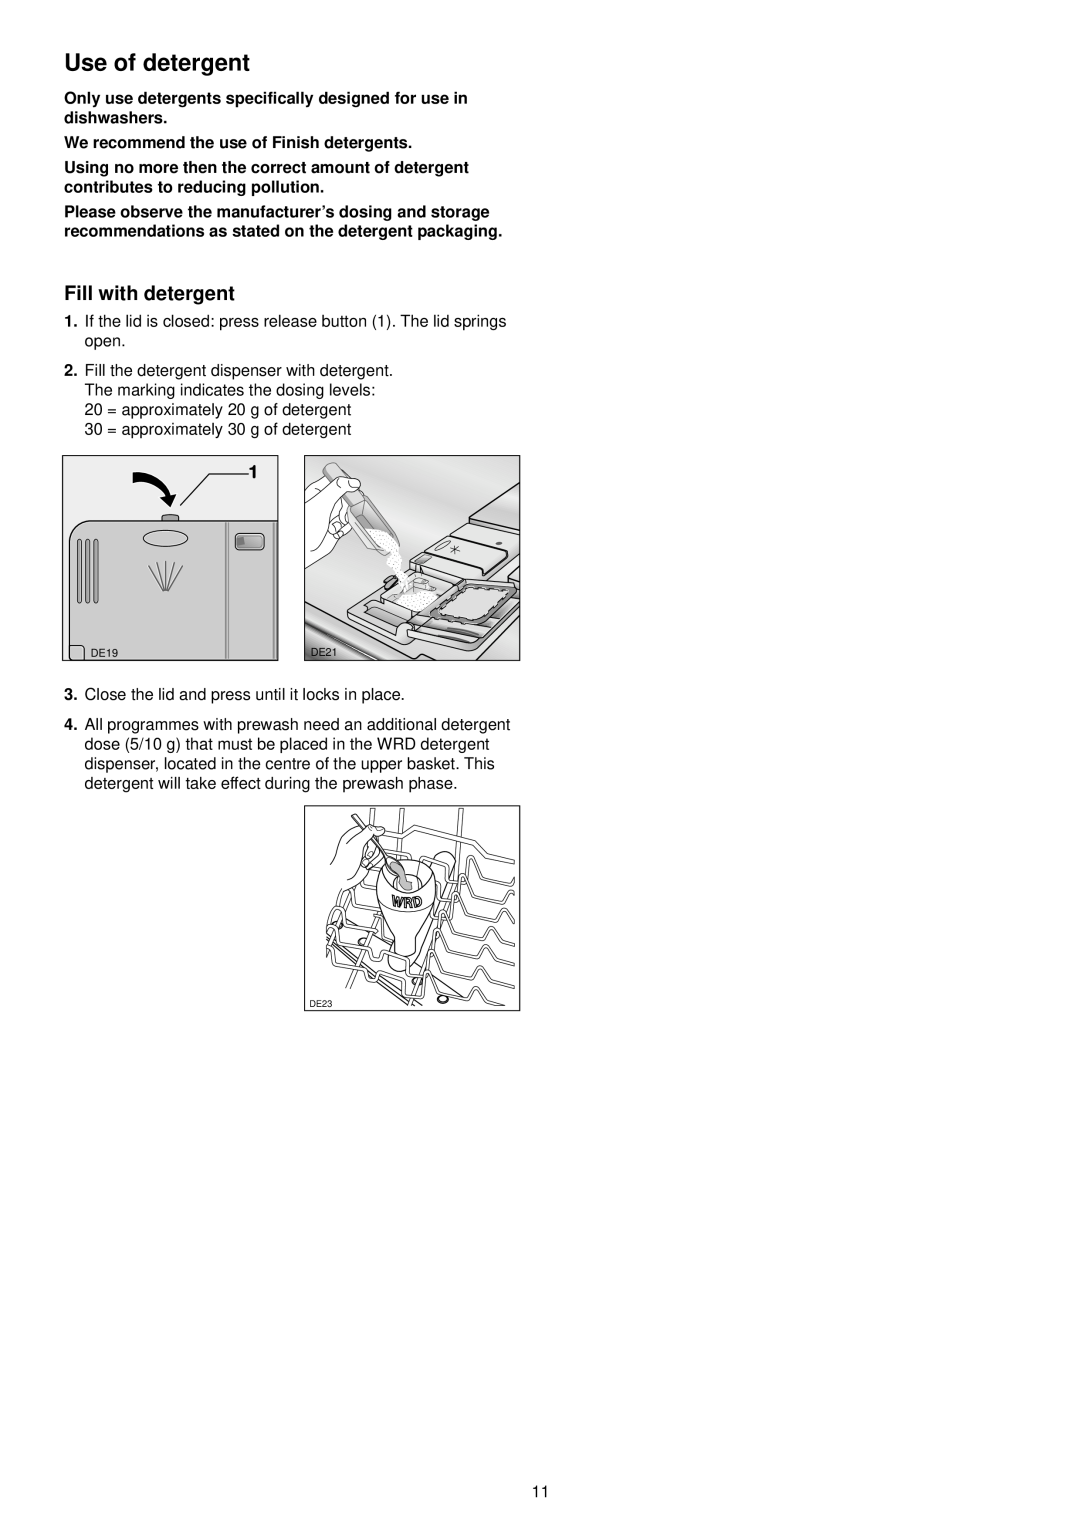 Zanussi DX 6451 manual Use of detergent, Fill with detergent 